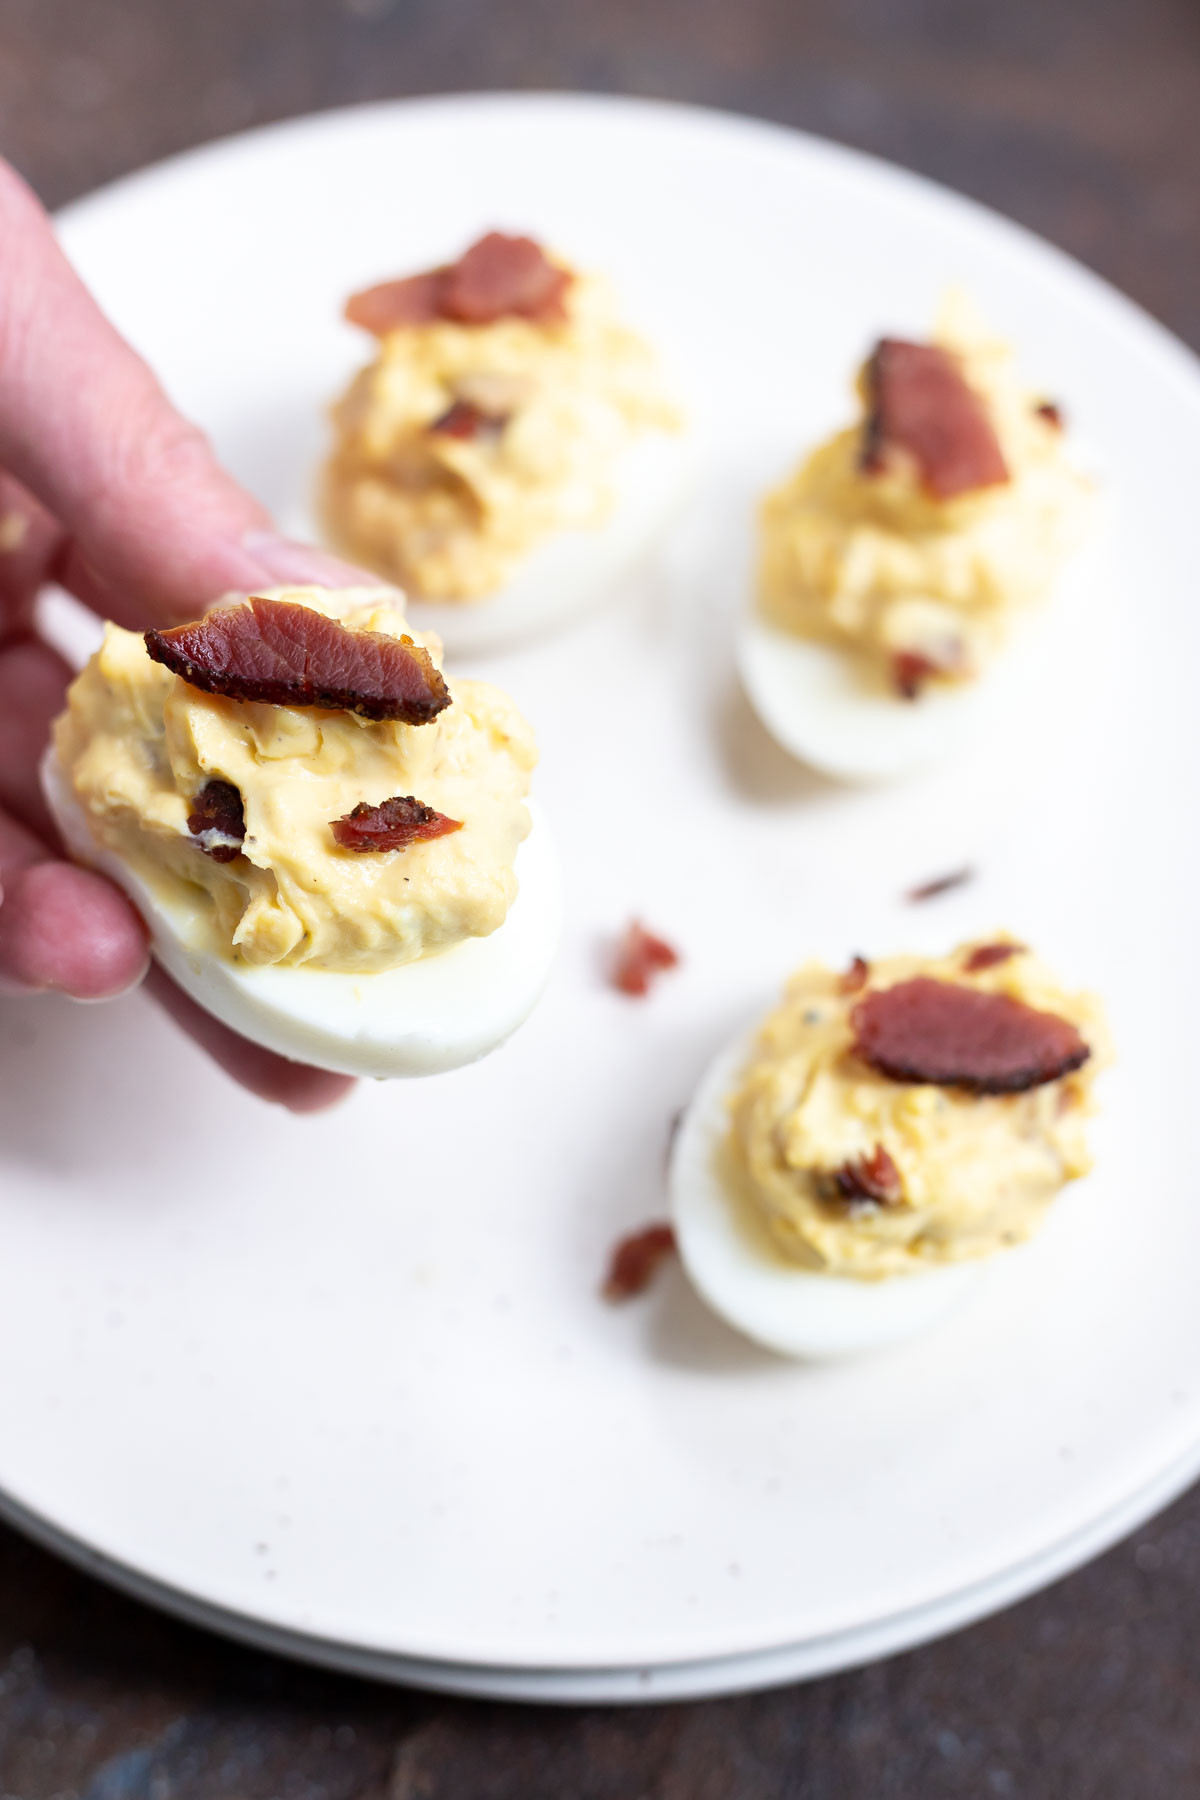 Deviled Eggs Recipe With Bacon
 BACON DEVILED EGGS RECIPE Tasty Low Carb Recipes